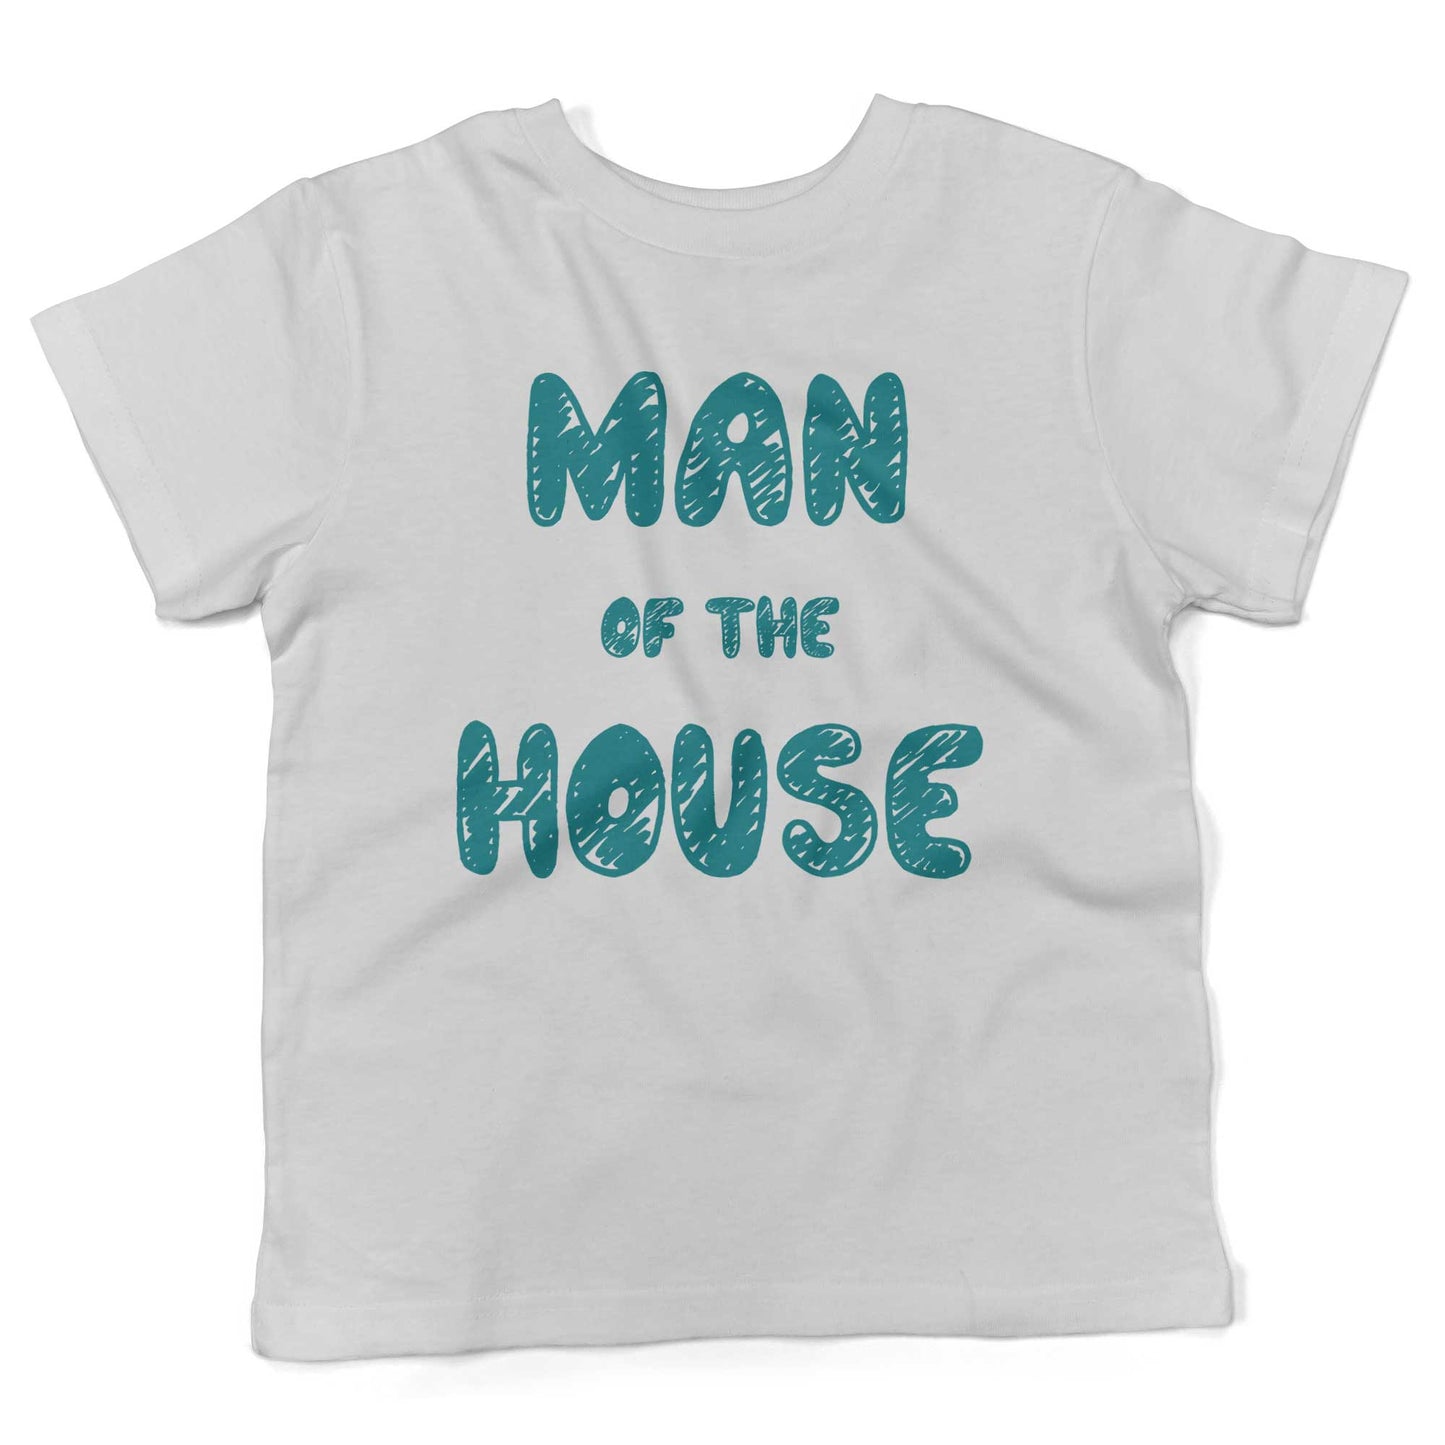 Man Of The House Toddler Shirt-White-2T